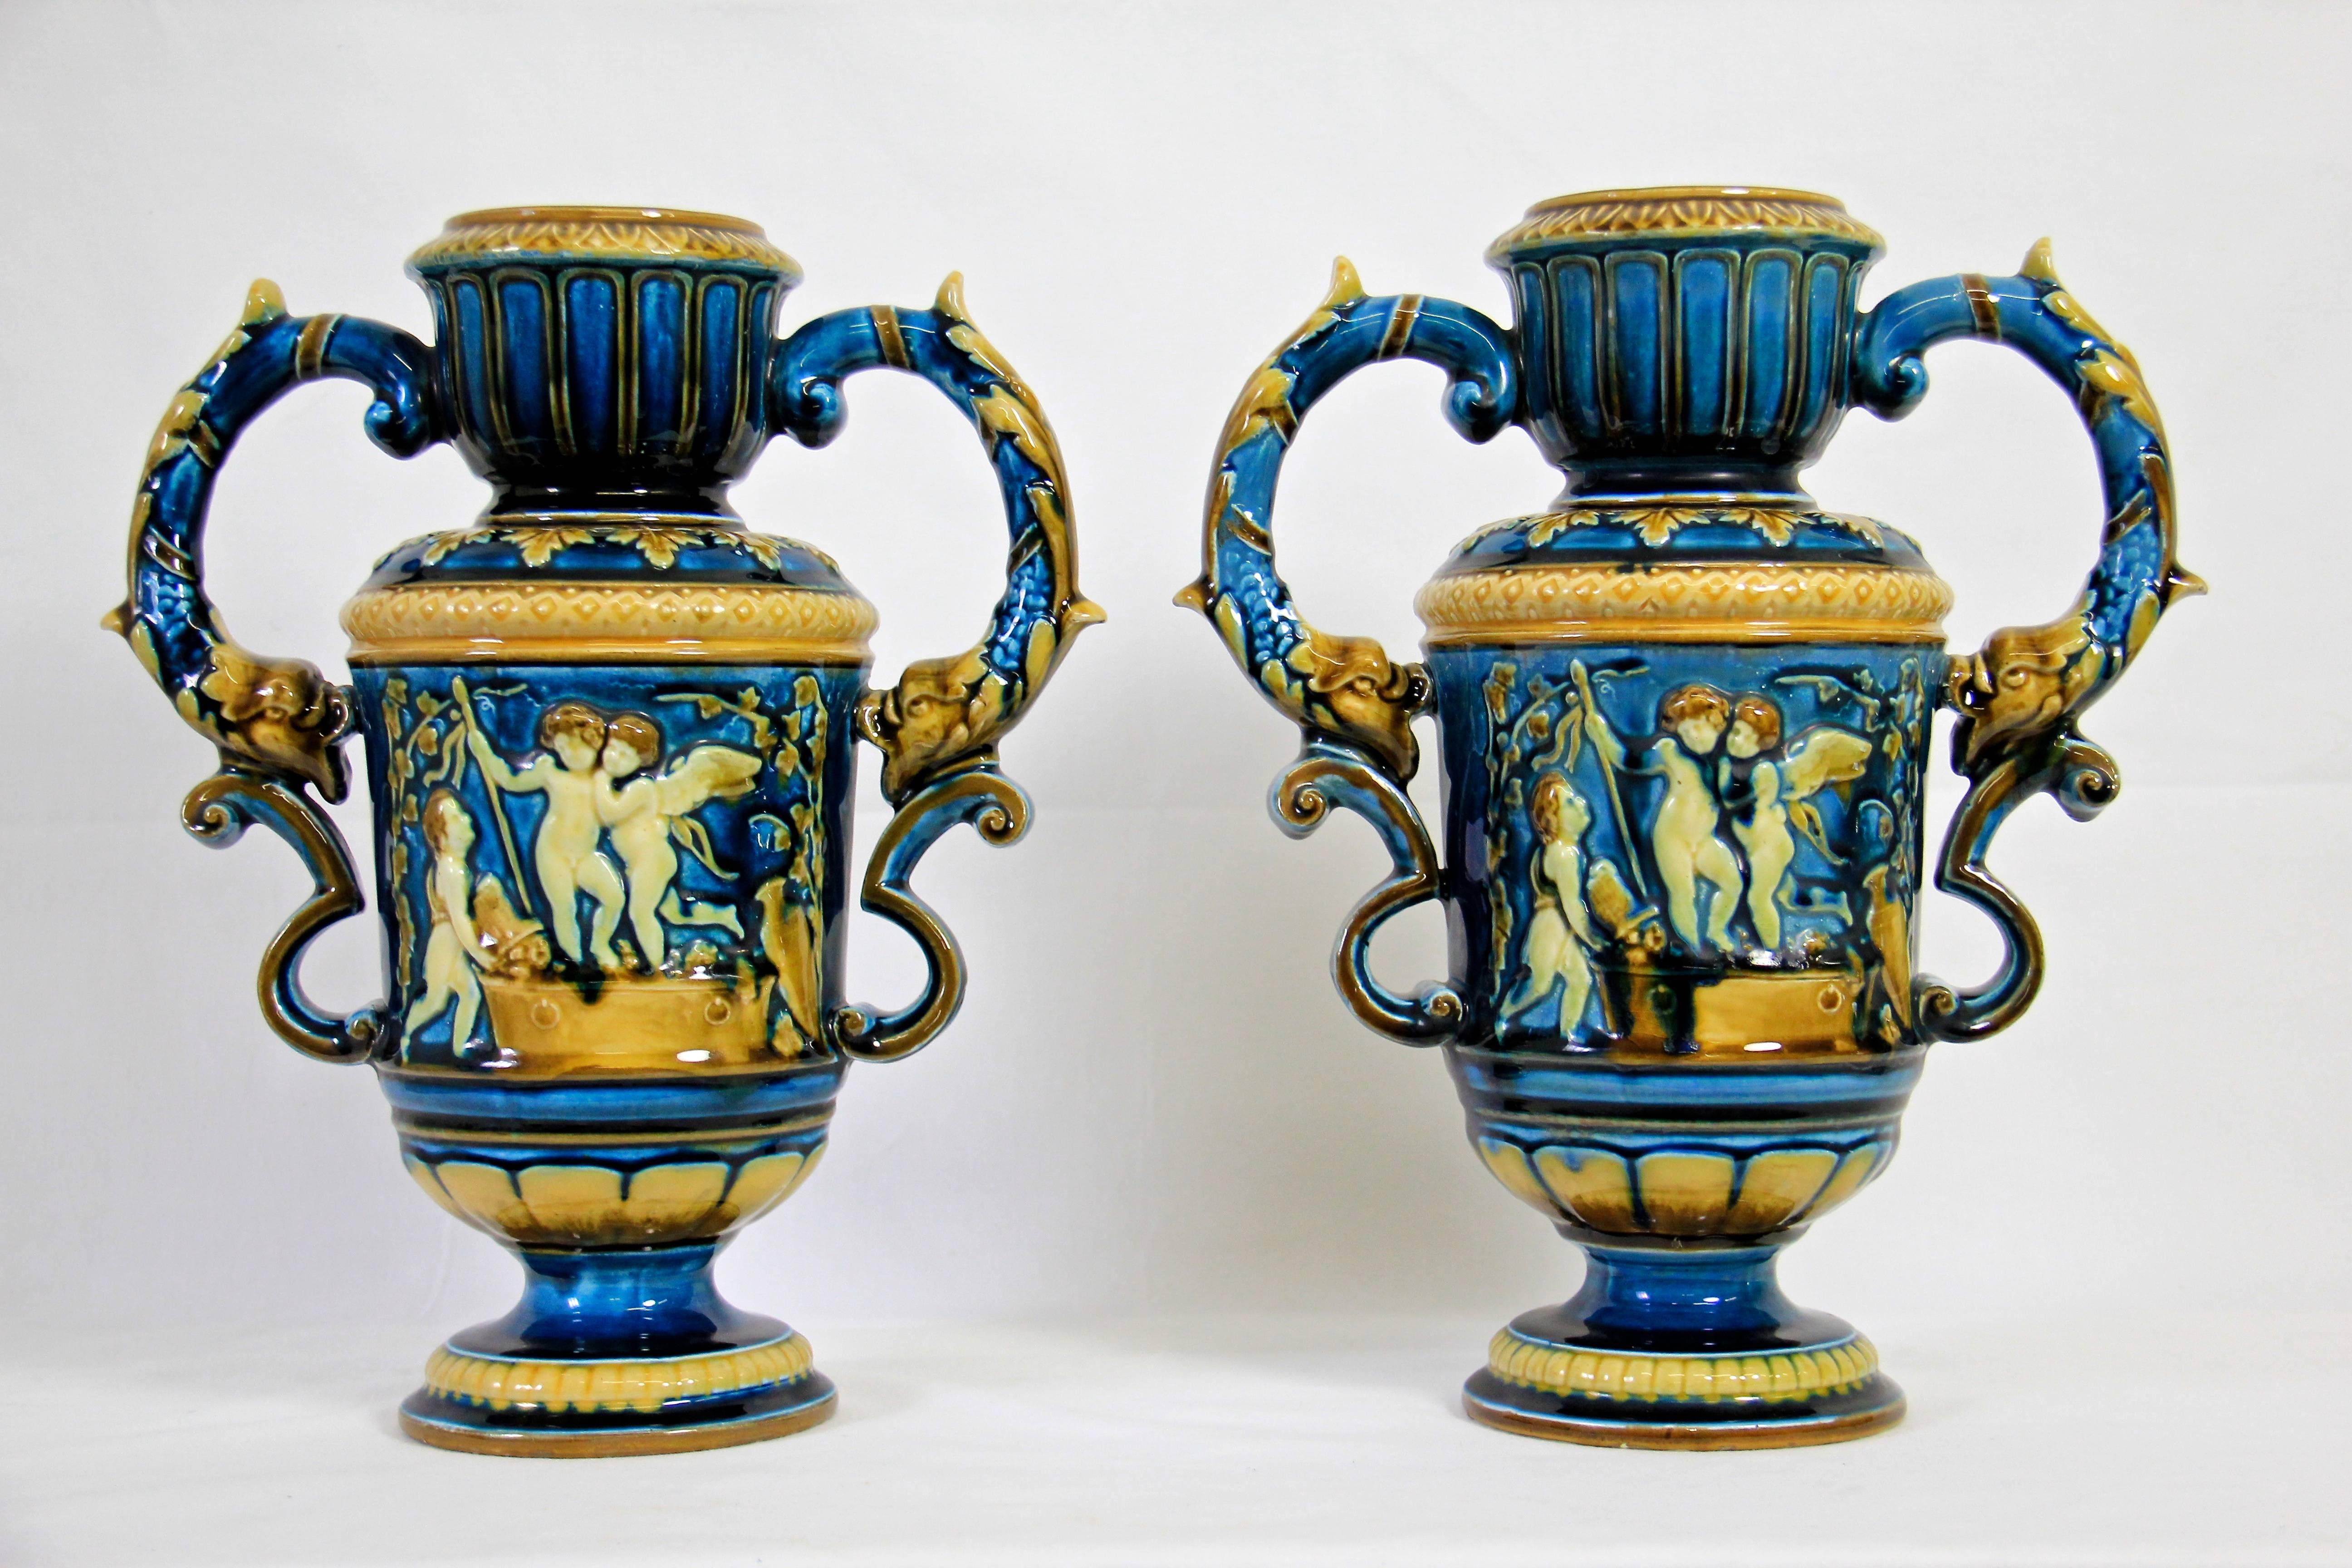 This amazing pair of Art Nouveau vases was made by the famous manufacture Schultz Oloumuszan Blansko. 
In 1854, the austrian producer Karl Schütz (1789-1872) acquired 1849 built earthenware factory, built by Peter Selb in Olomuszan Blanska in